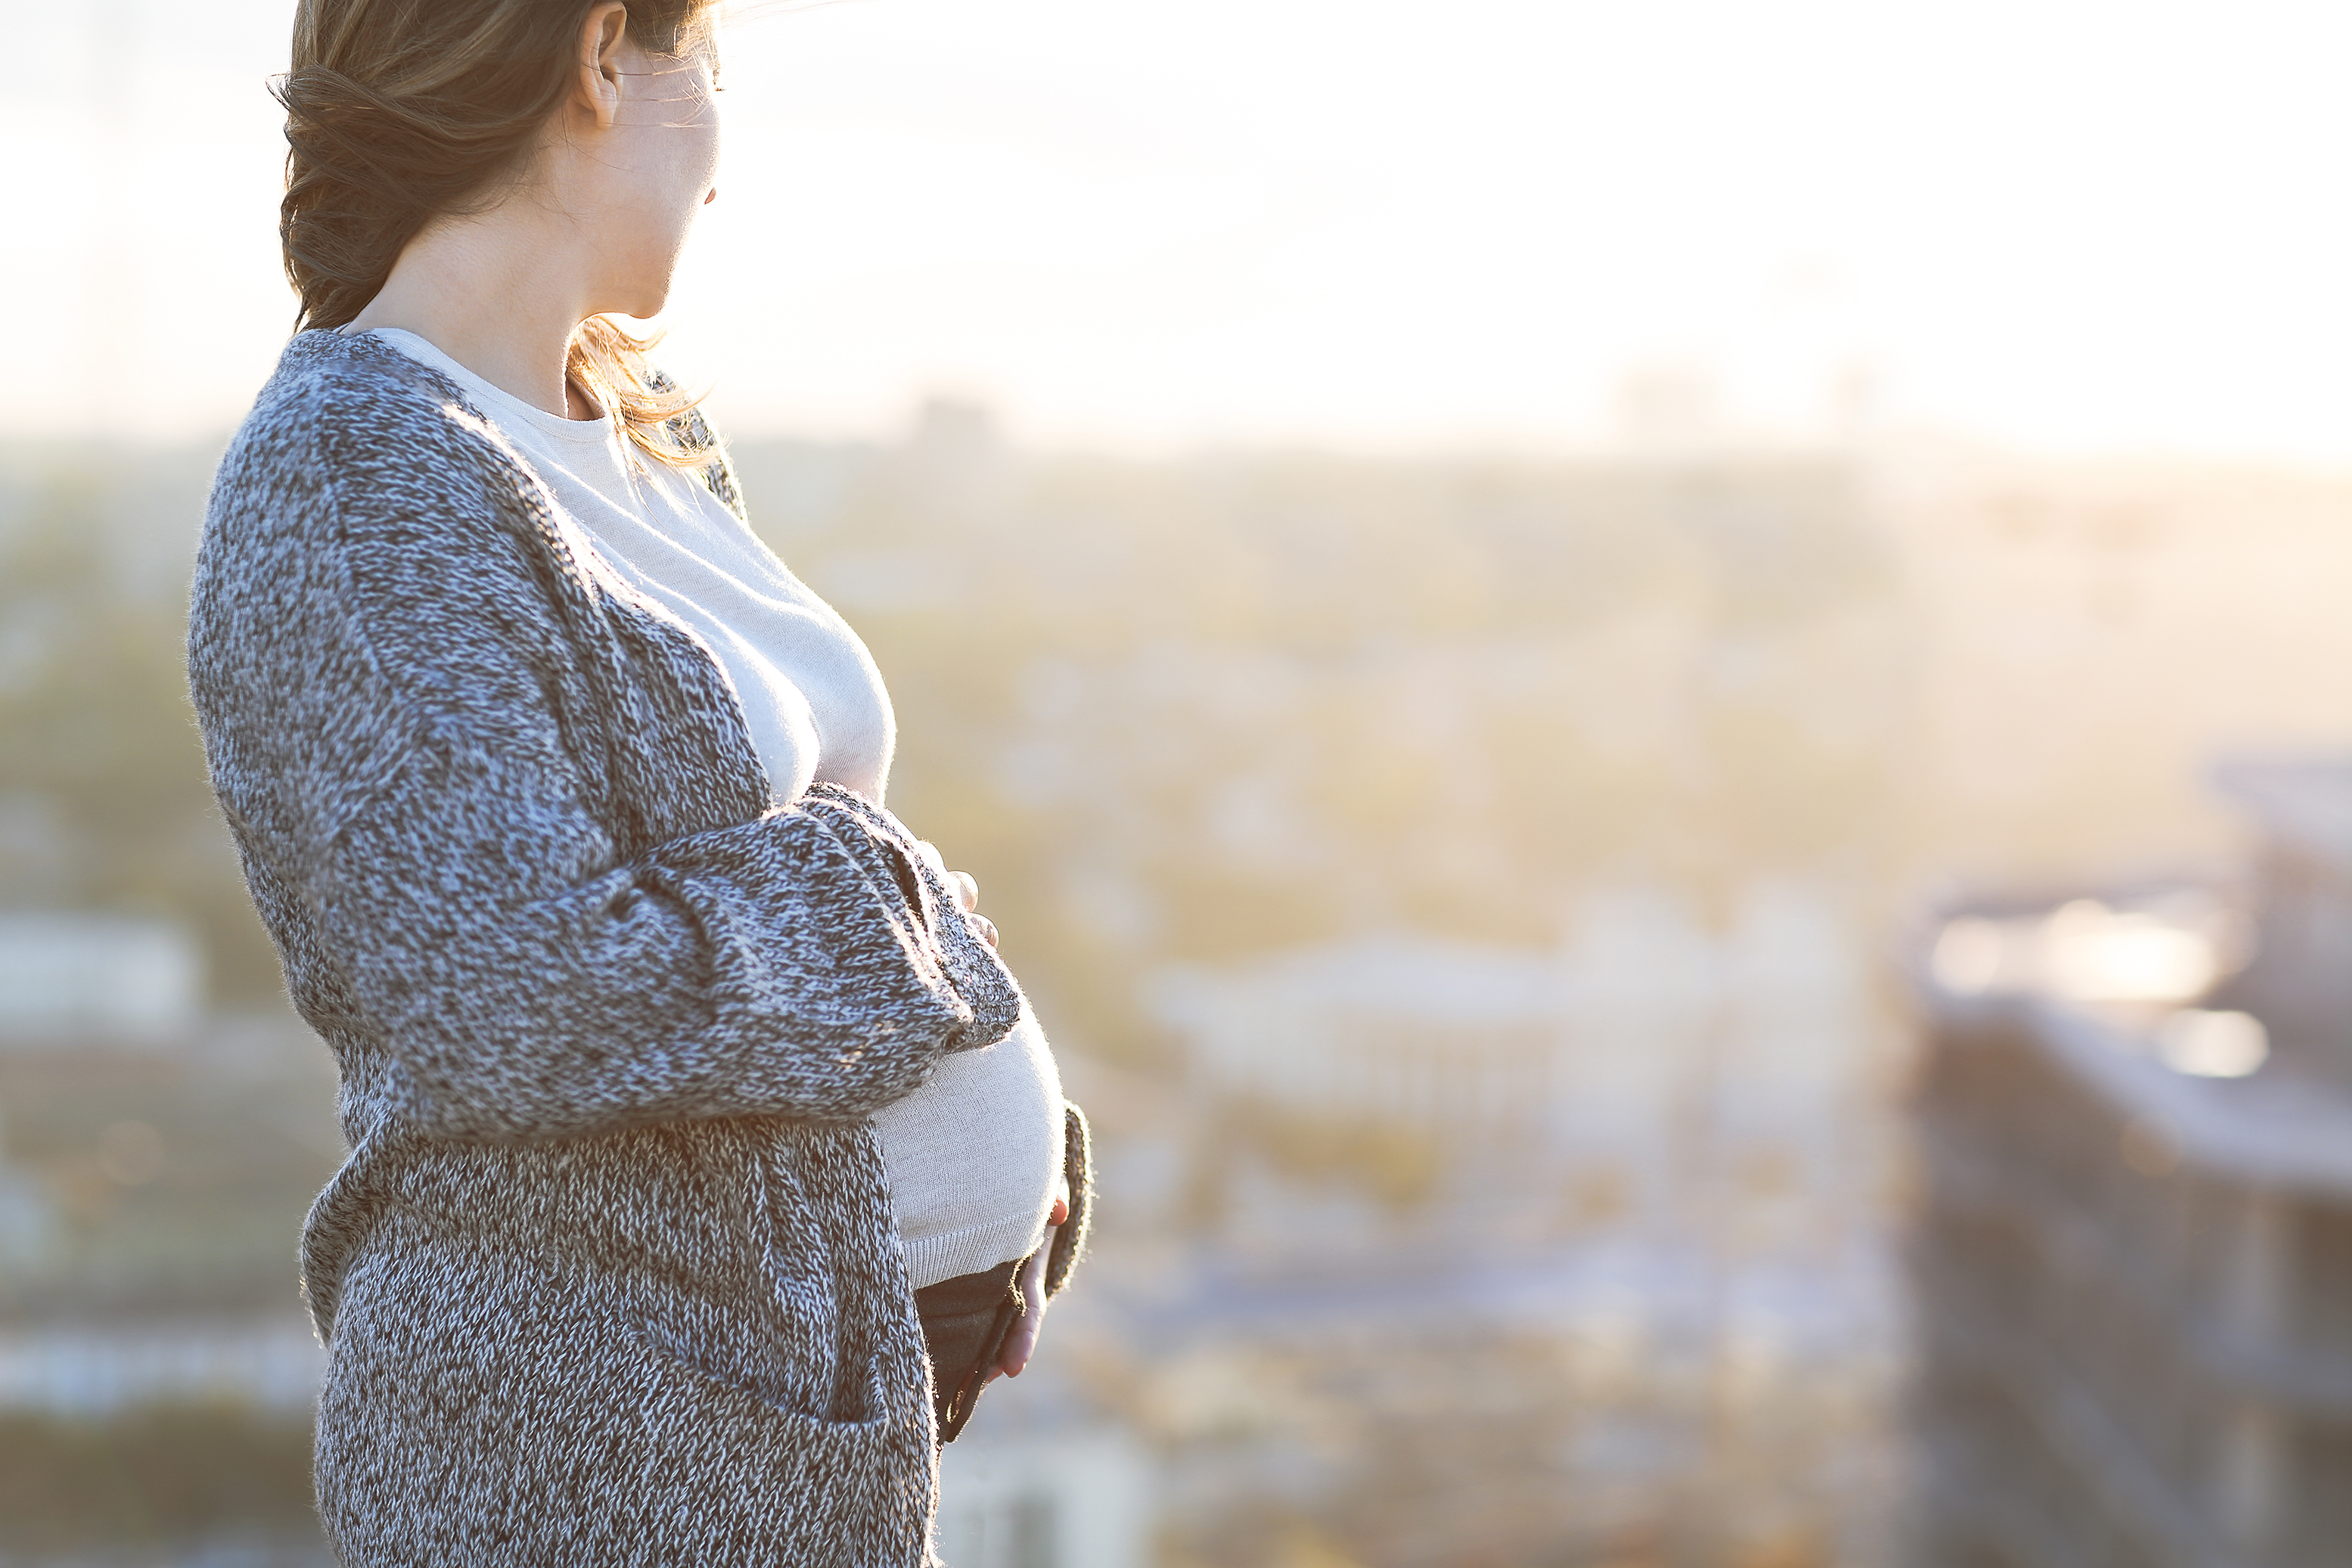 Pregnant woman overlooking a city